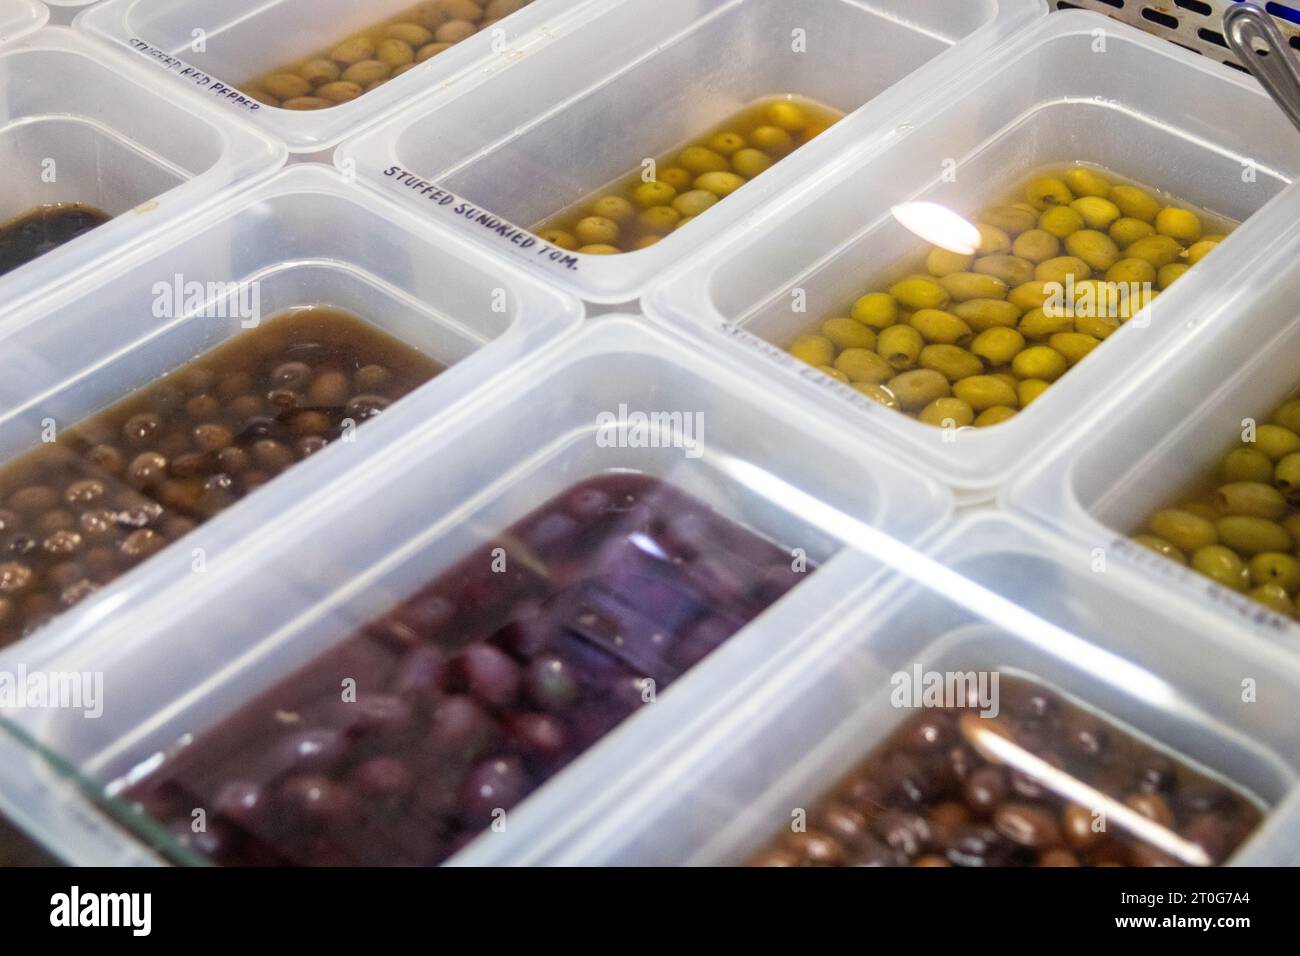 A Self Serve Olive Bar with different choices Stock Photo